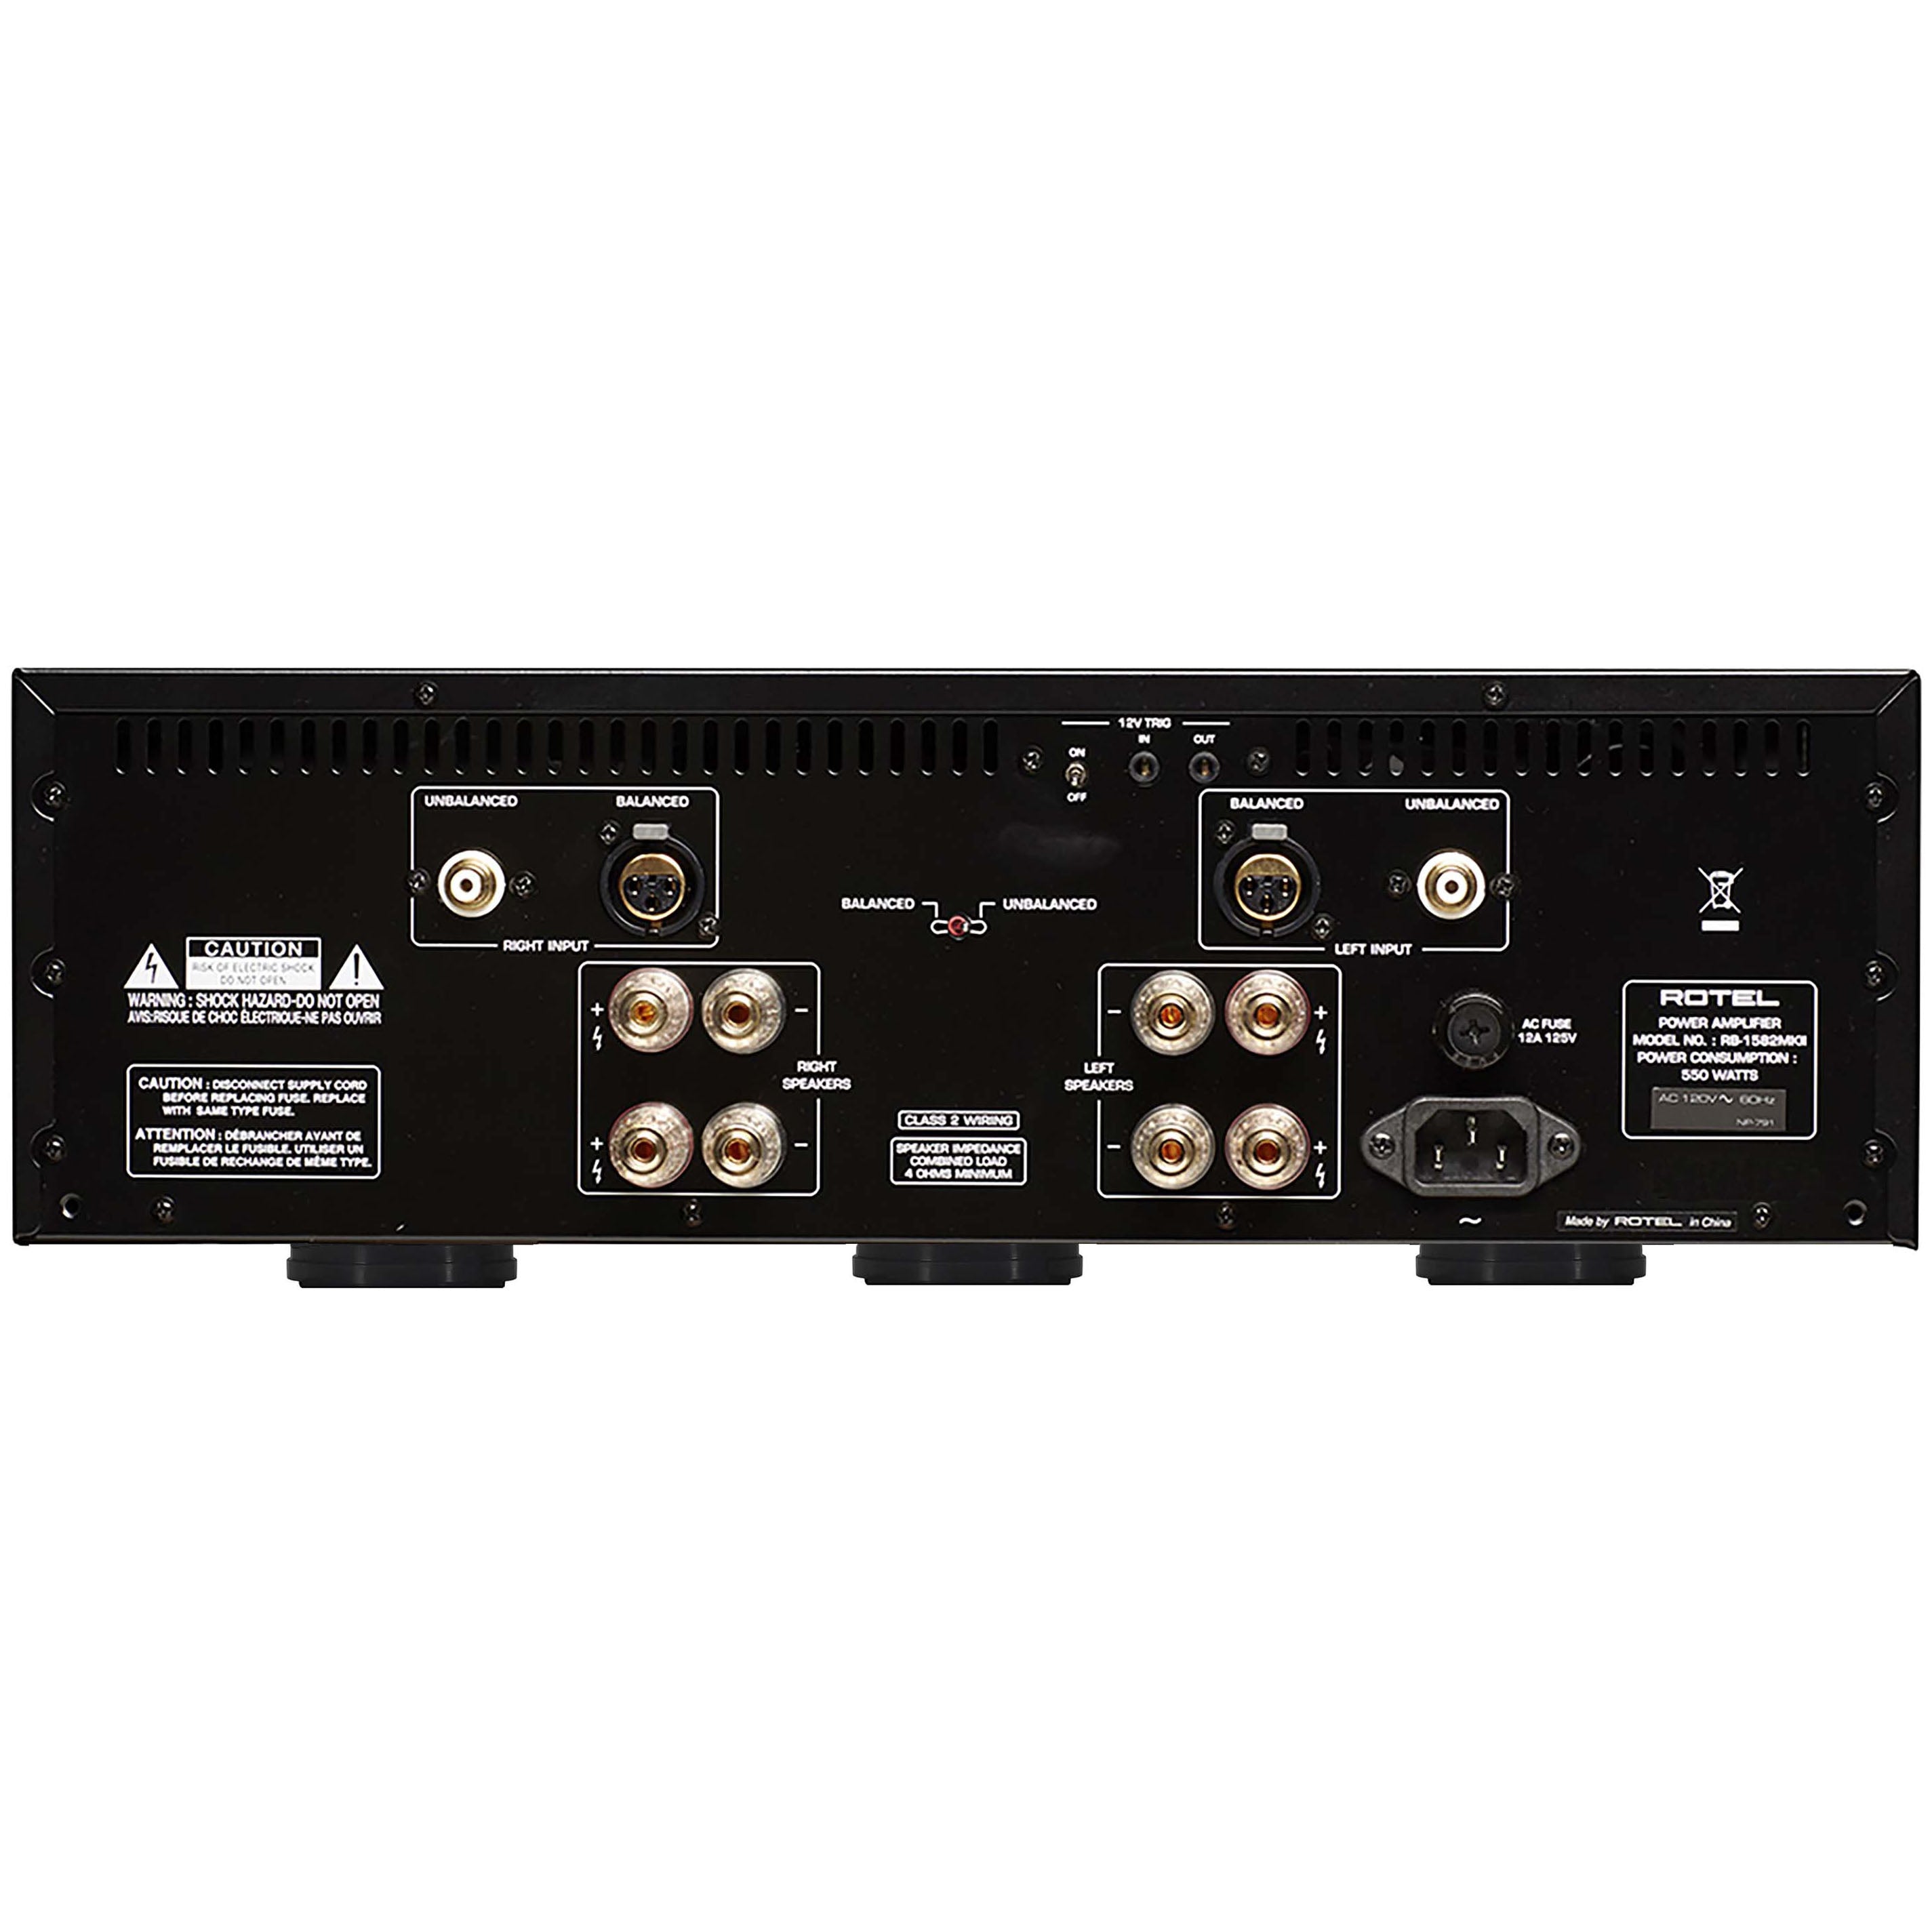 Rotel RB-1582 MK II Stereo Power Amplifier